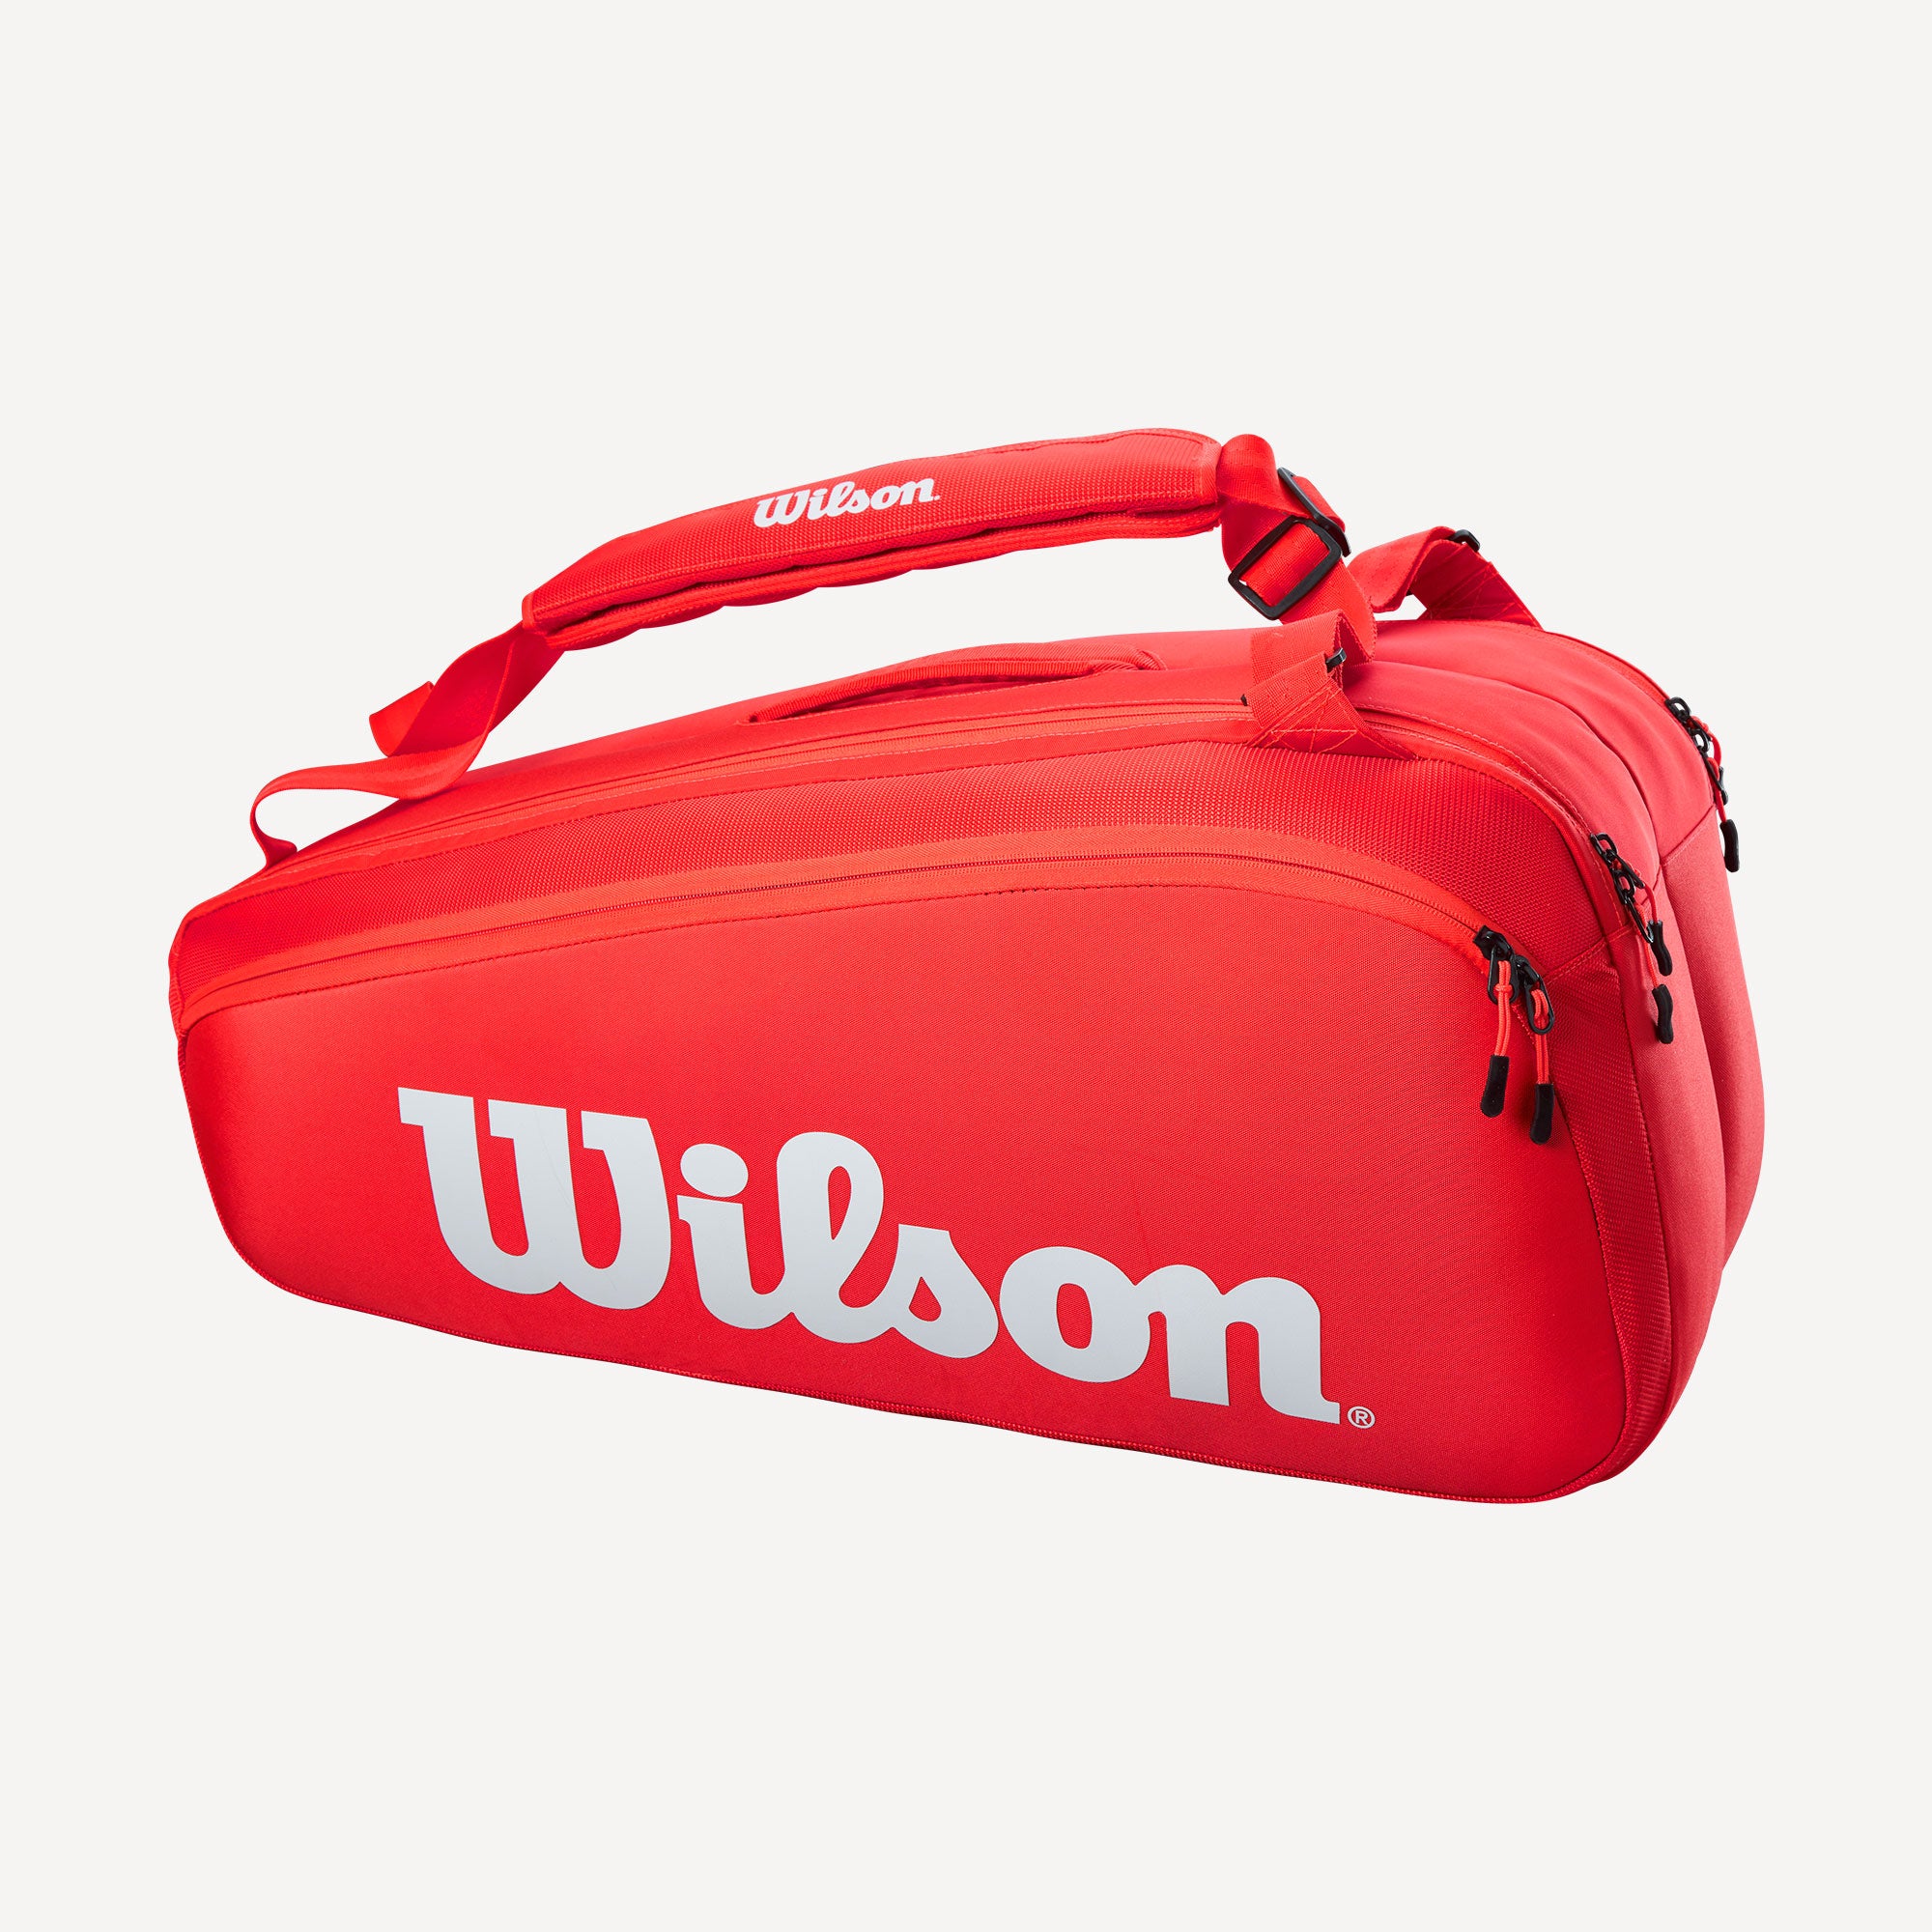 Wilson Super Tour 9 Pack Tennis Back Red (1)